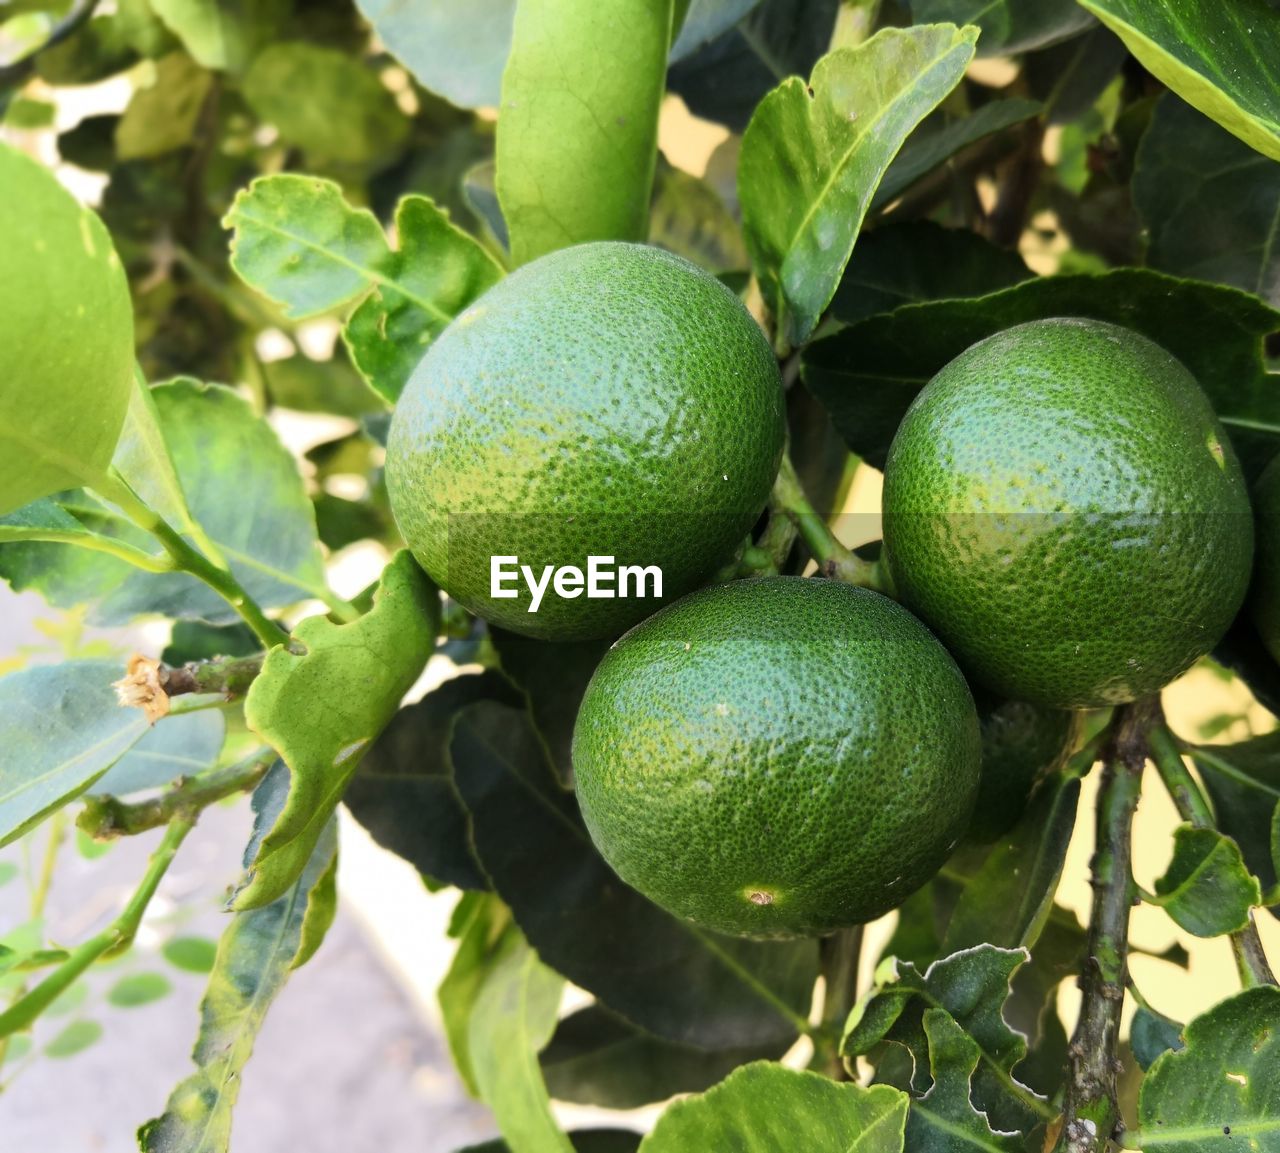 A close up of a lemon growing on the tree
